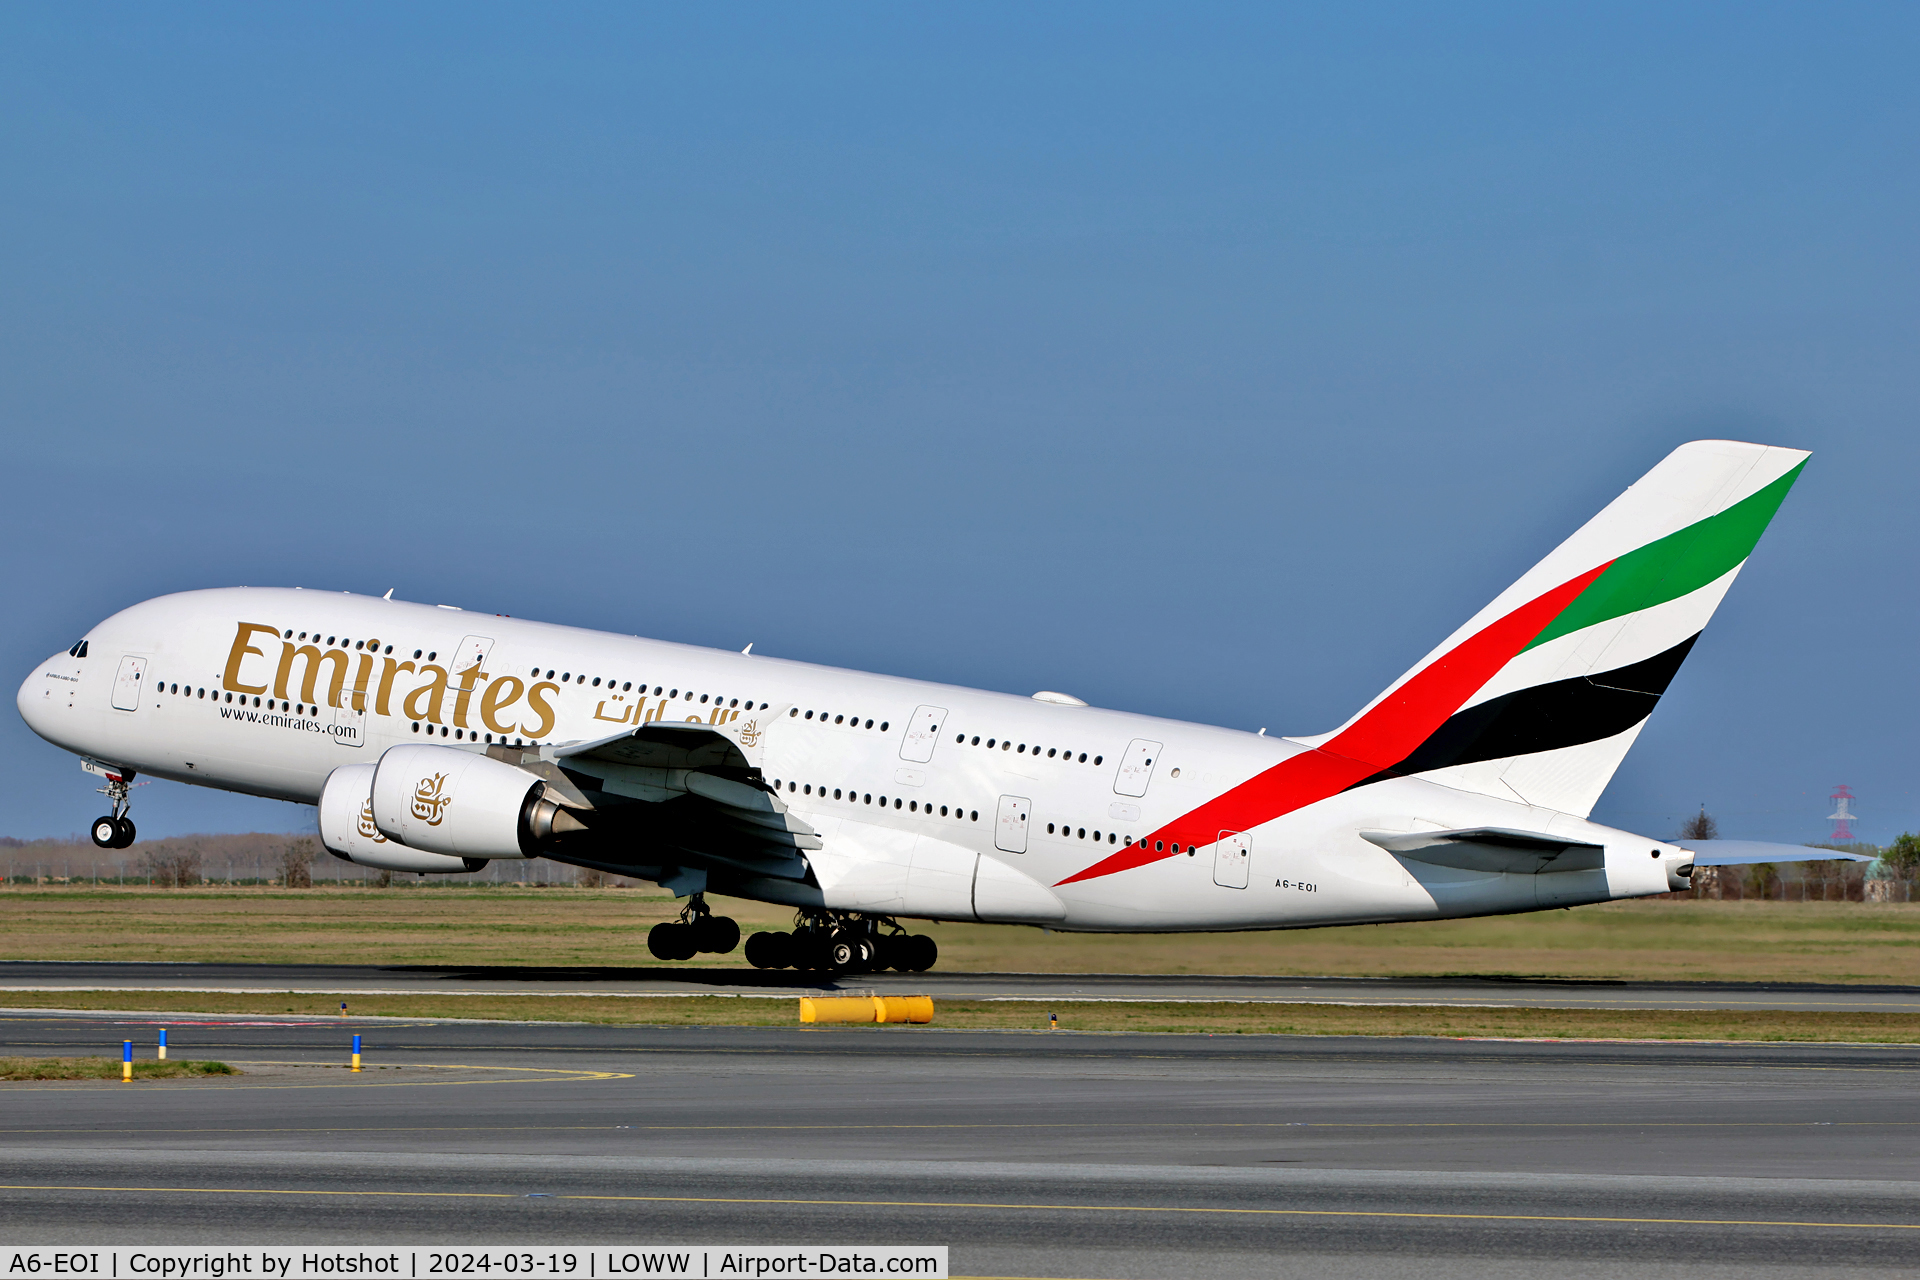 A6-EOI, 2014 Airbus A380-861 C/N 178, Lifting-off from runway 34.